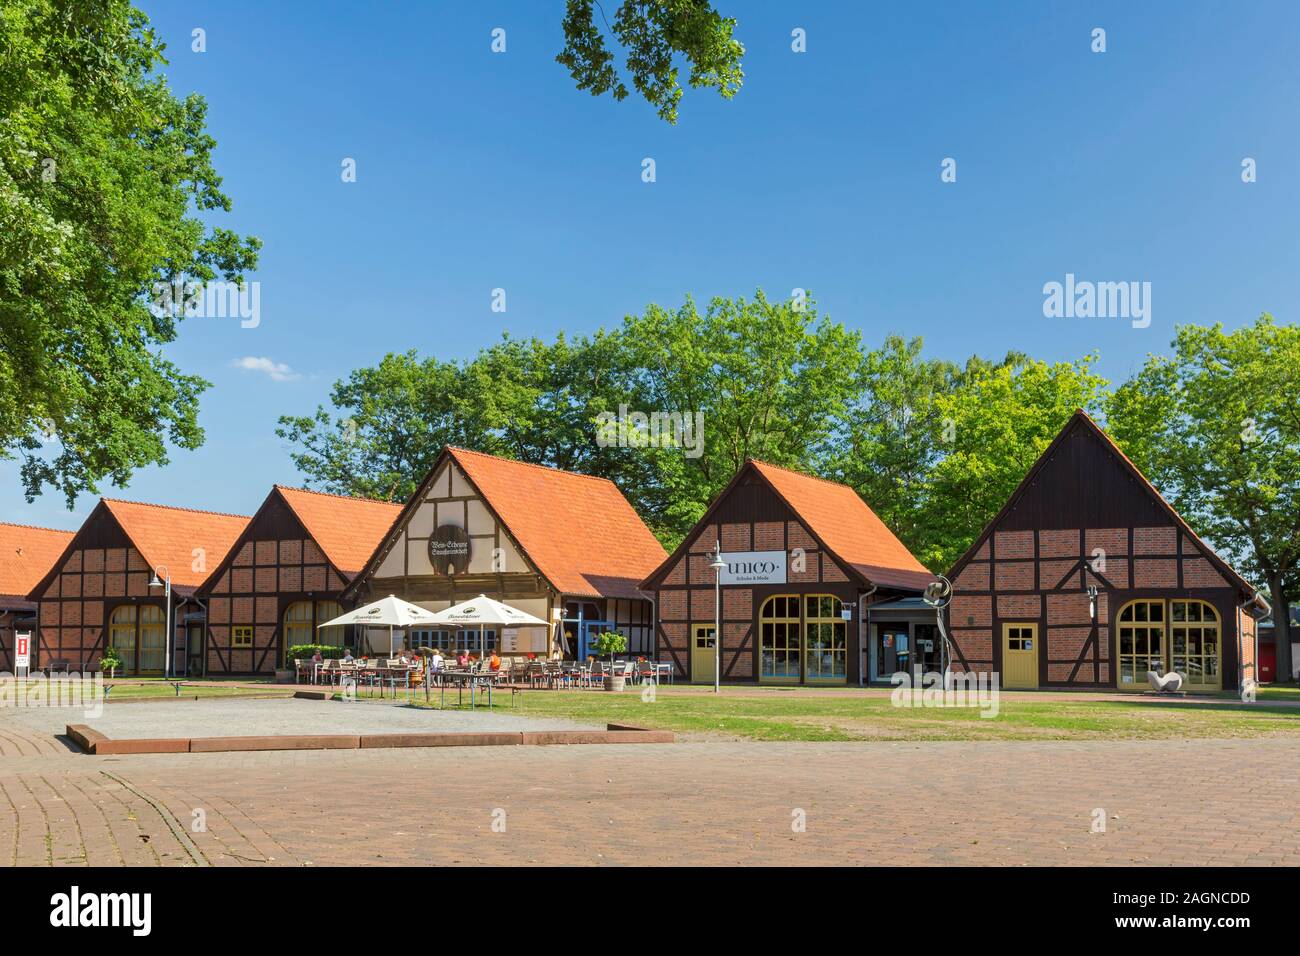 18th century timber framed houses / barns at the village Steinhude in the borough of Wunstorf in Hanover Region, Lower Saxony / Niedersachsen, Germany Stock Photo